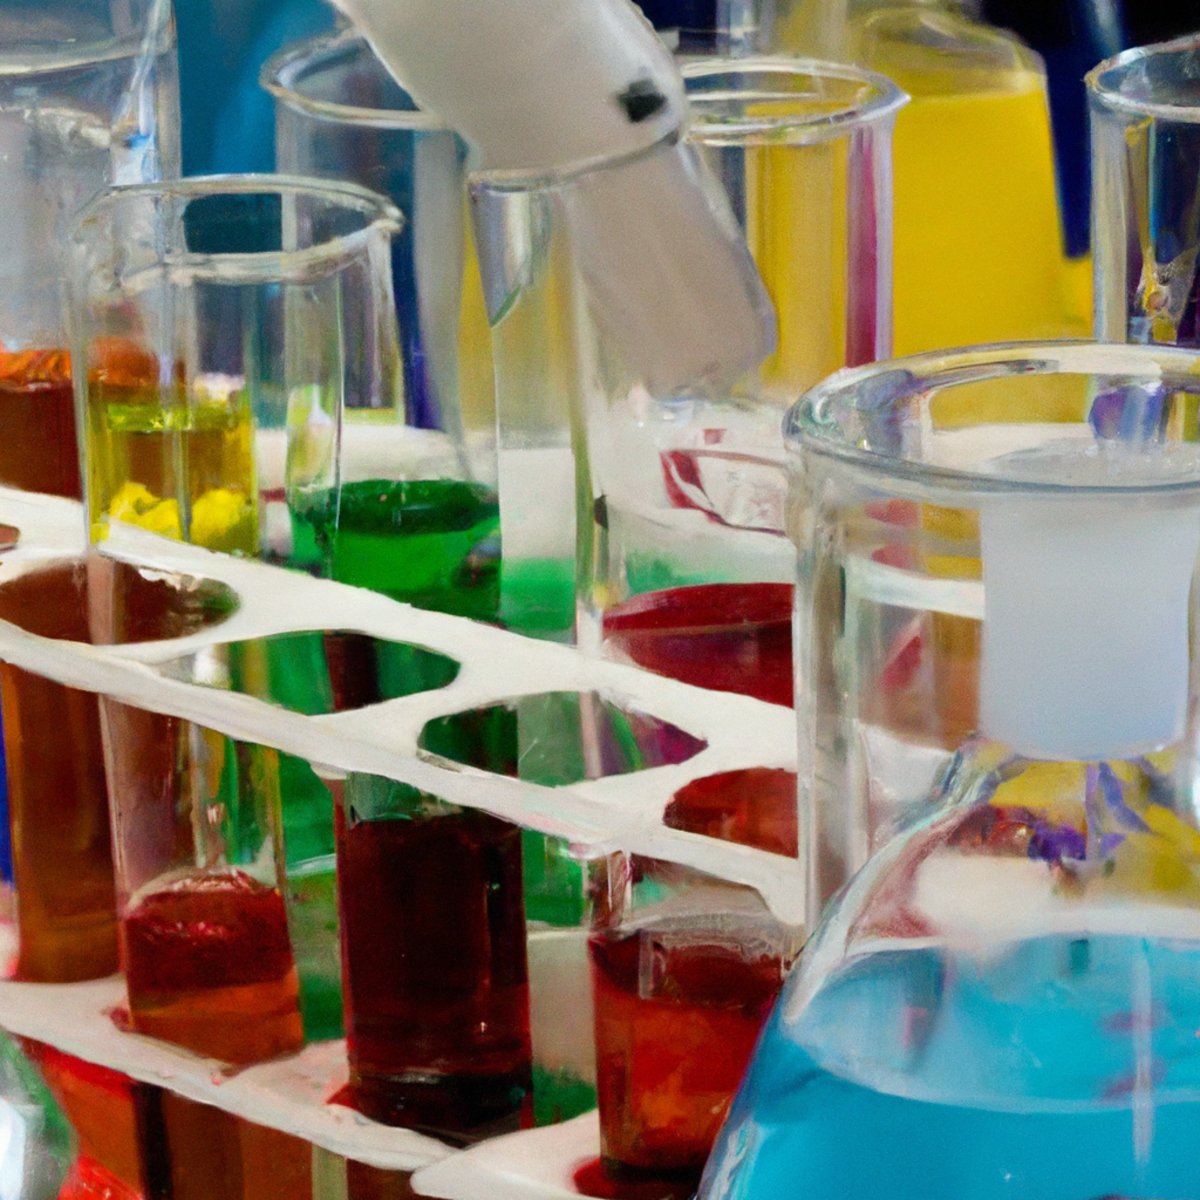 Close-up of laboratory setting with test tubes, beakers, and scientific equipment showcasing vibrant liquids -Tyrosinemia